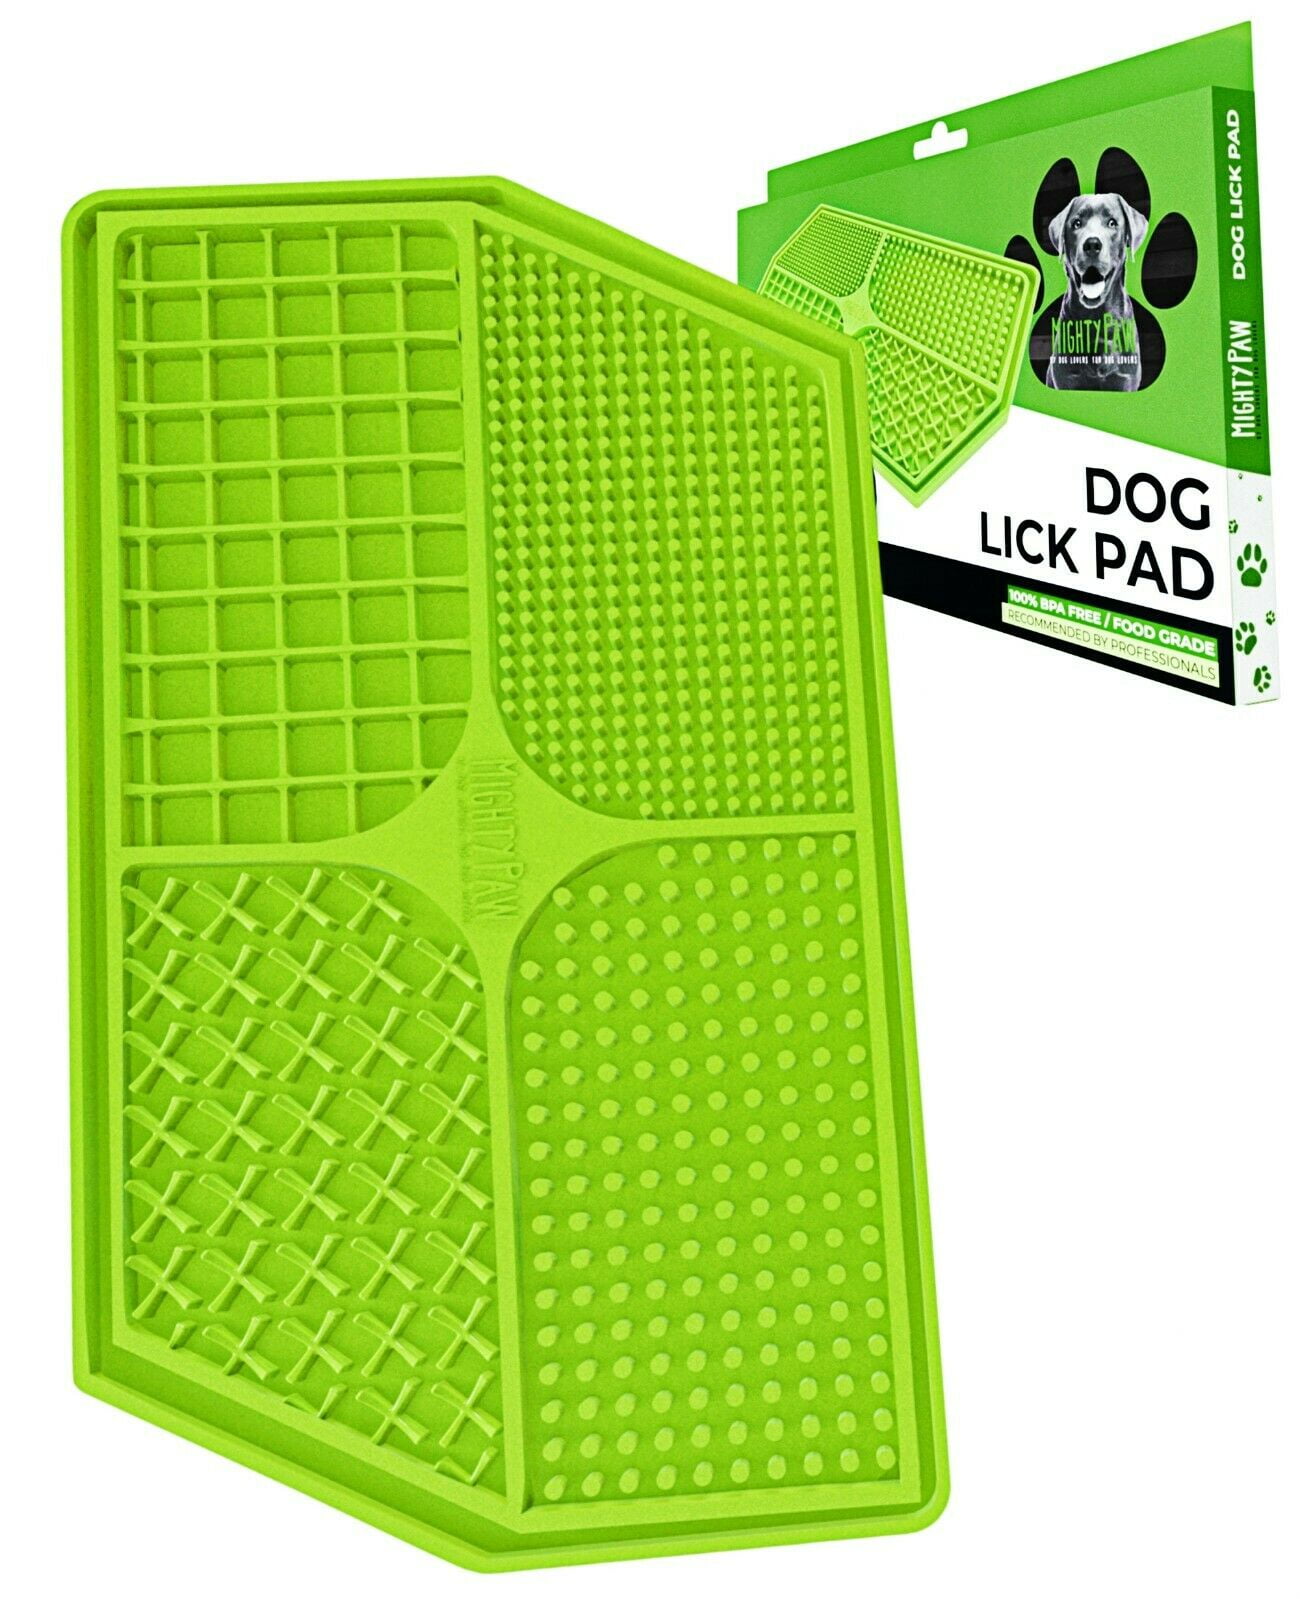 Vicooda Pet Feeding Mat Cat & Dog Mats for Food & Water - Flexible and Easy to Clean Feeding Mat - Non-Slip Waterproof Feeding Mat for Dog Food 